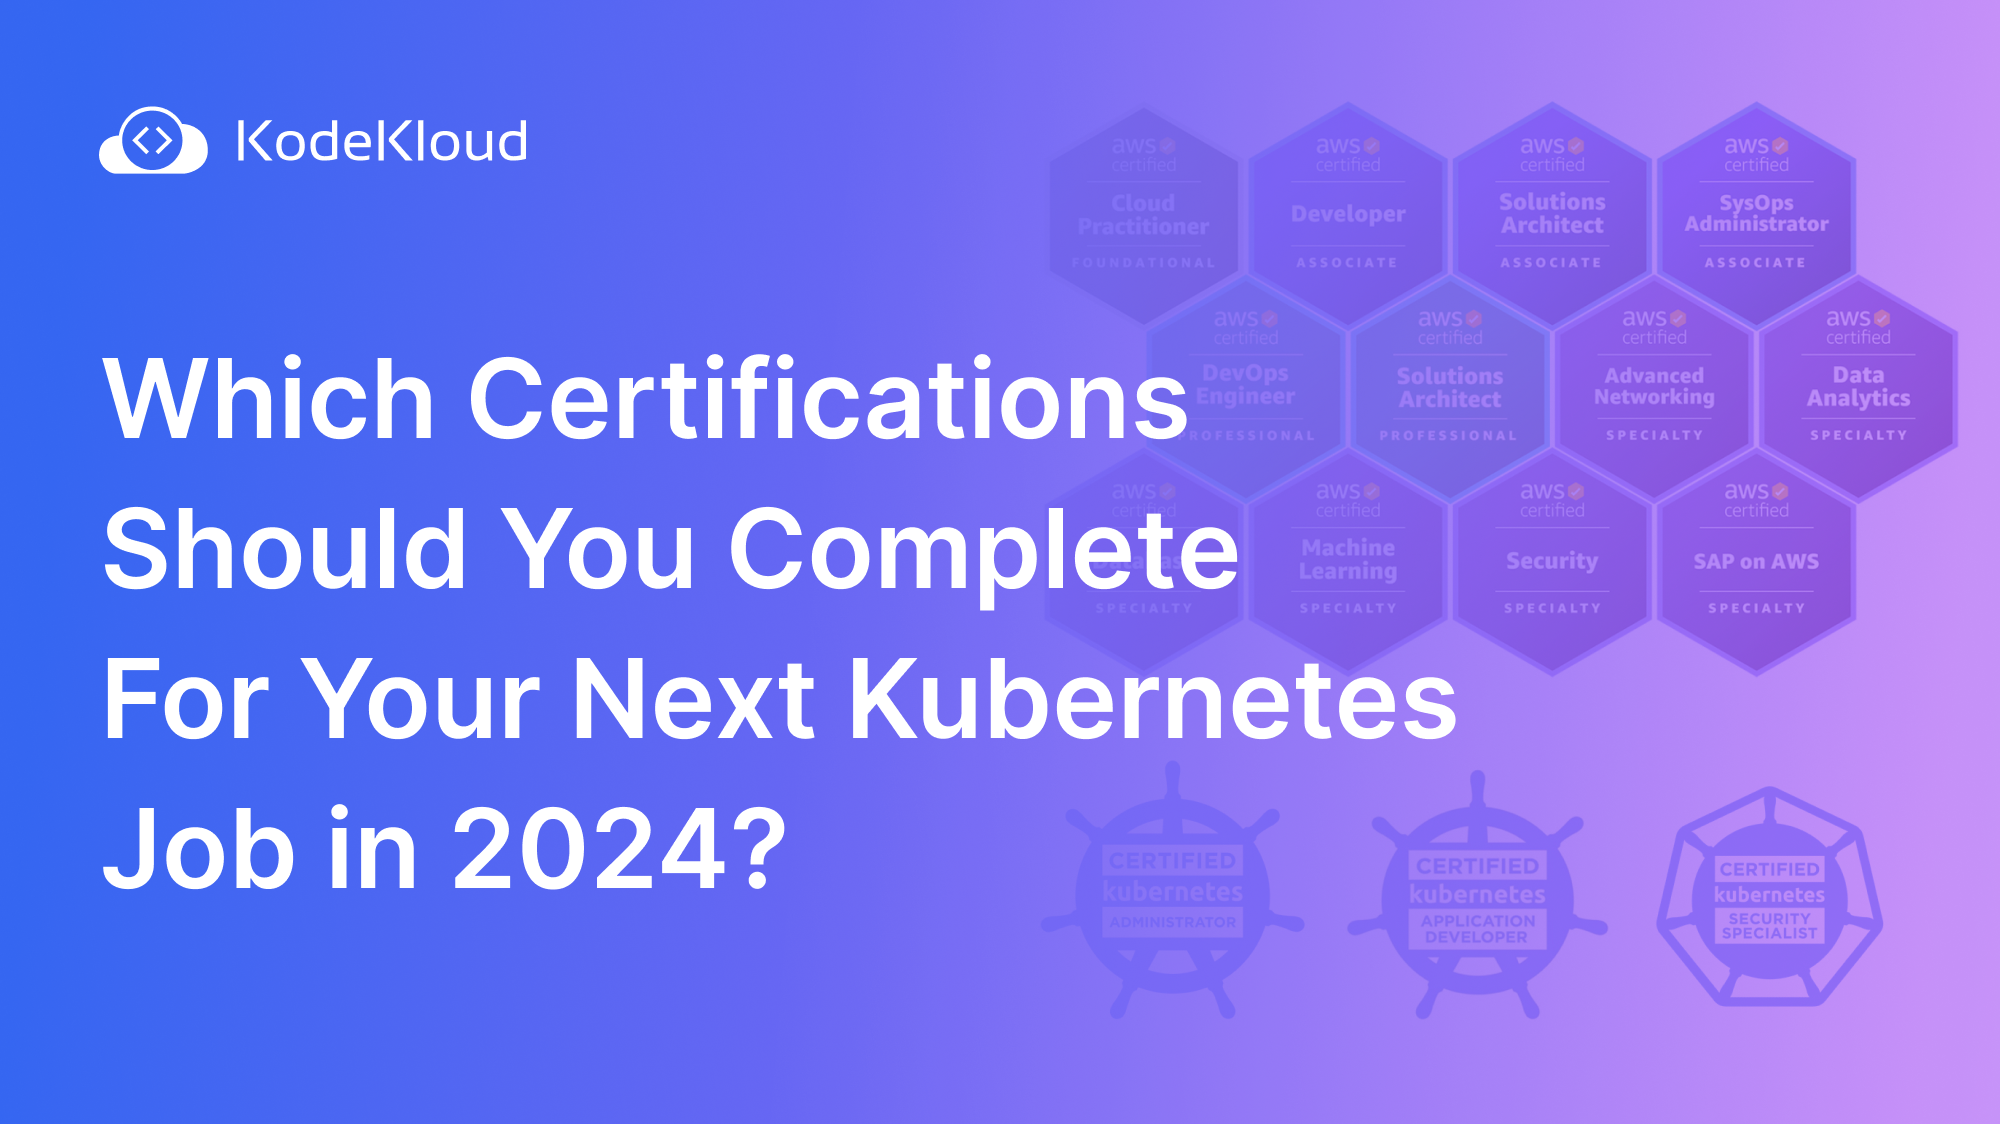 Which Certifications Should You Complete for Your Next Kubernetes Job in 2024?